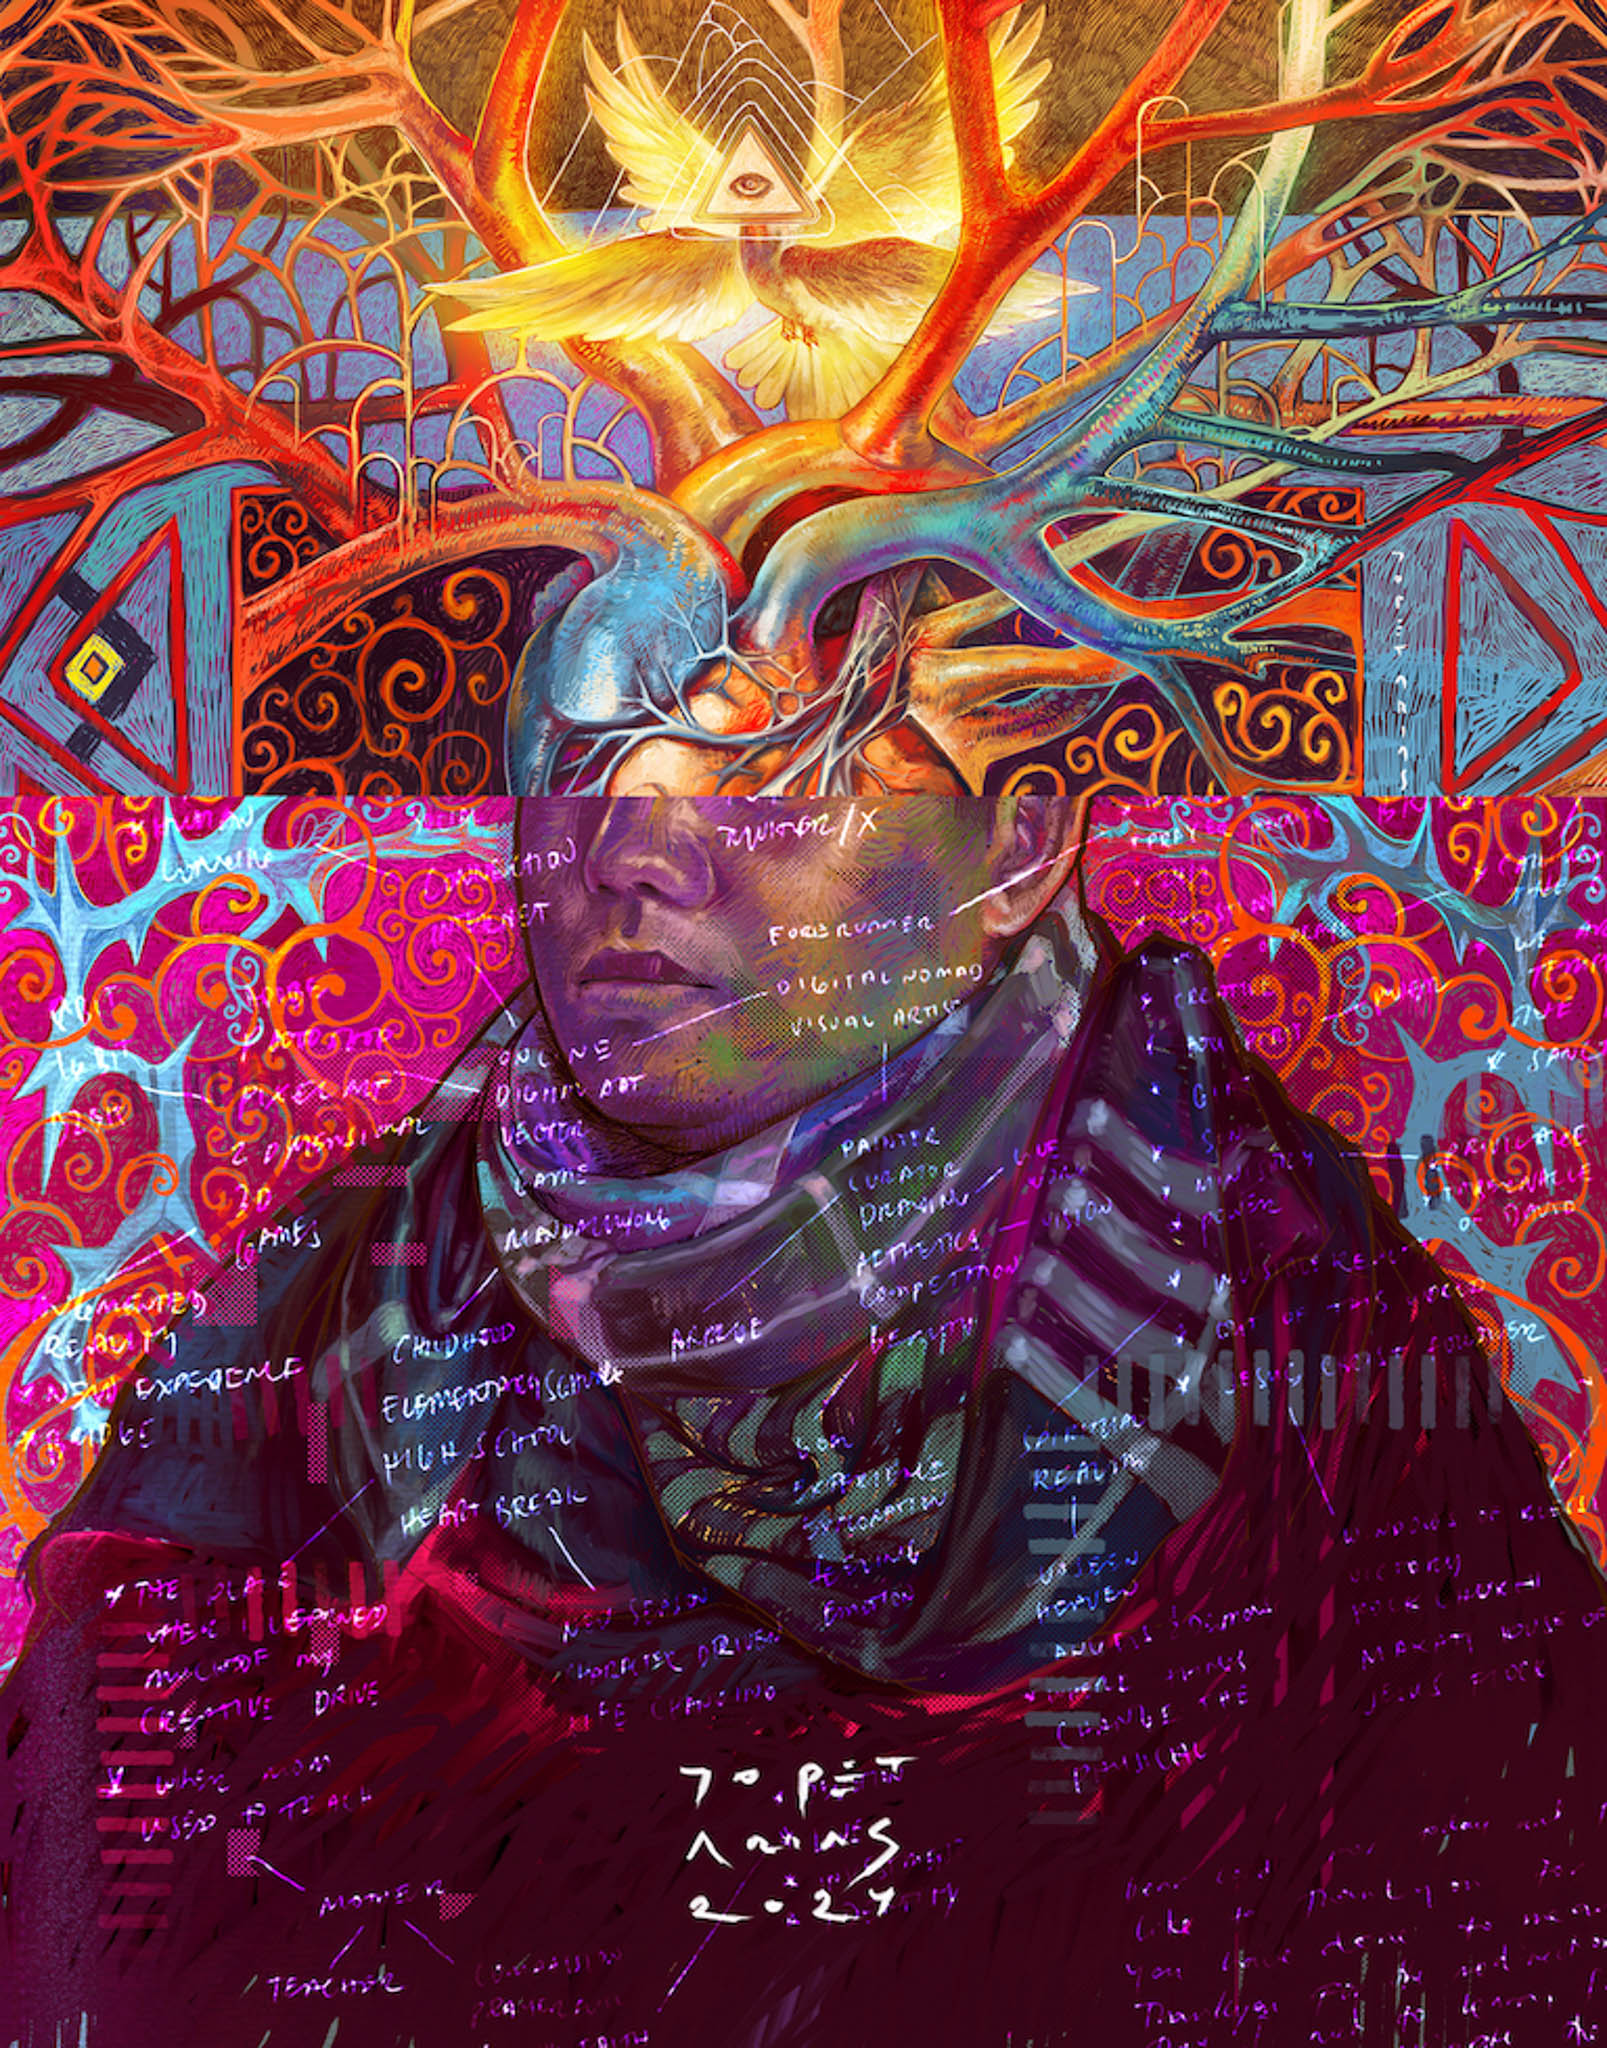 A colorful work of art depicting a person whose head appears to be a human heart.